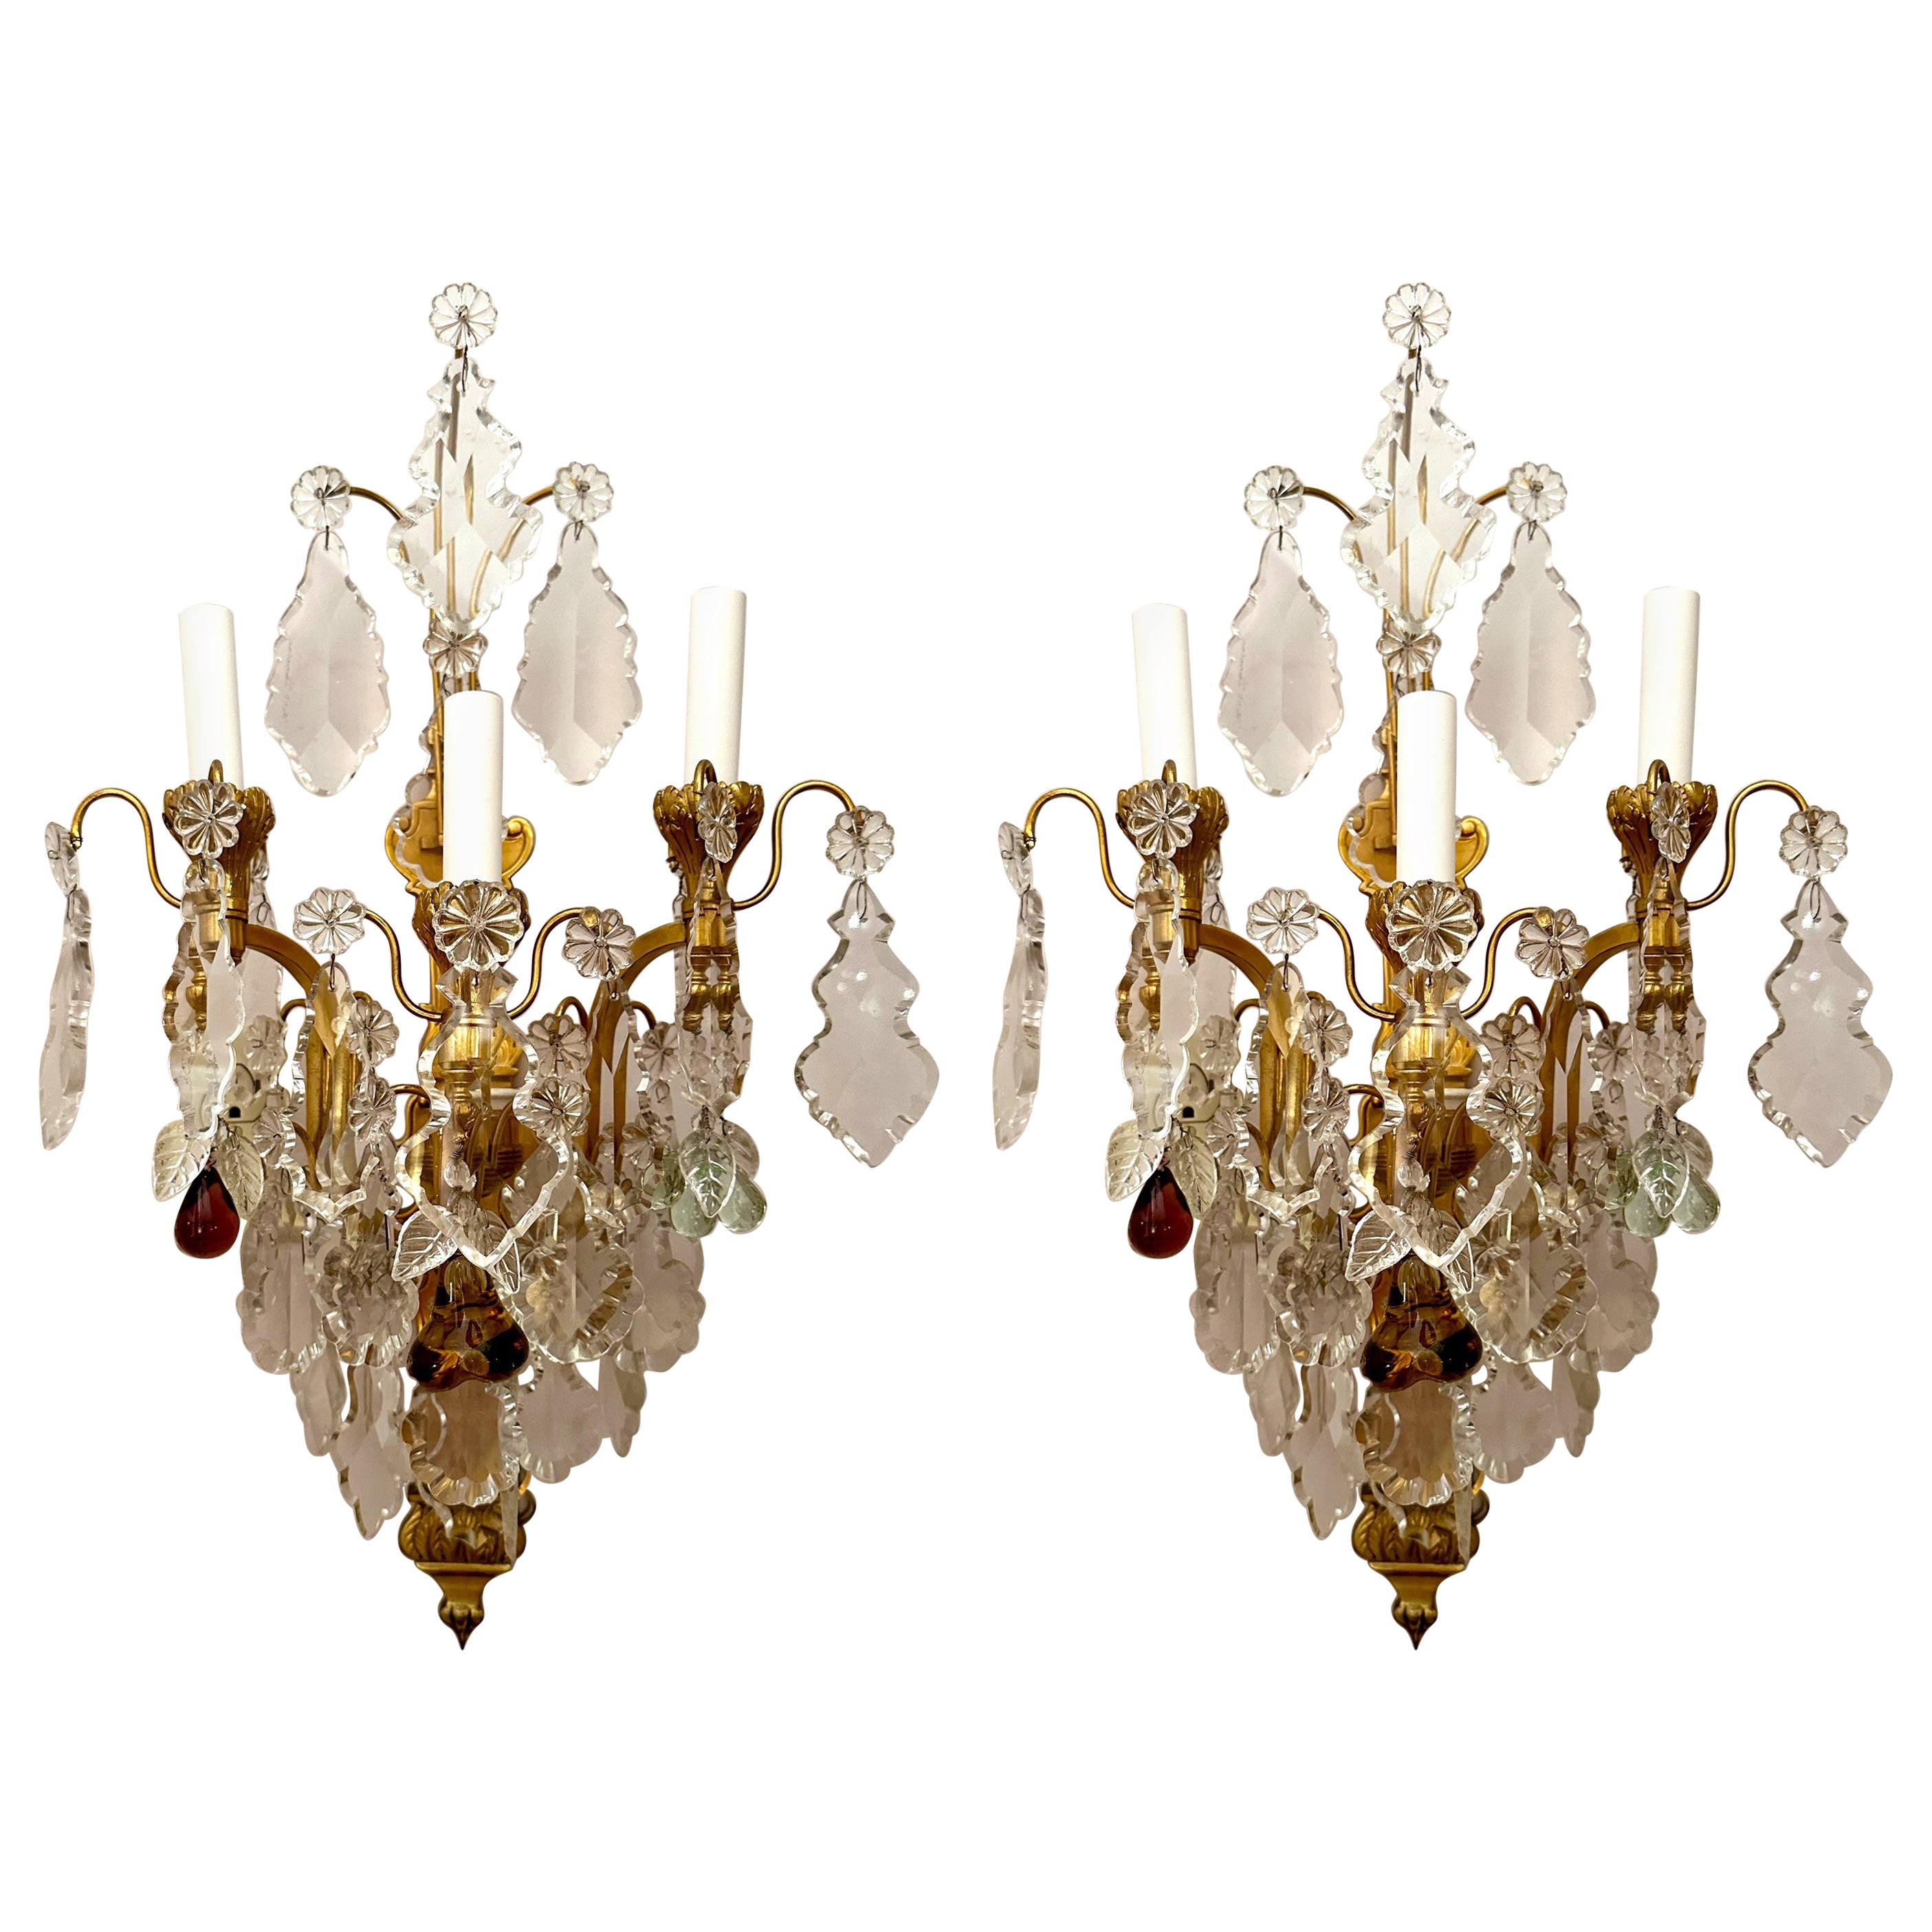 Pair Antique French Baccarat Crystal and Ormolu Sconces, Circa 1880. For Sale